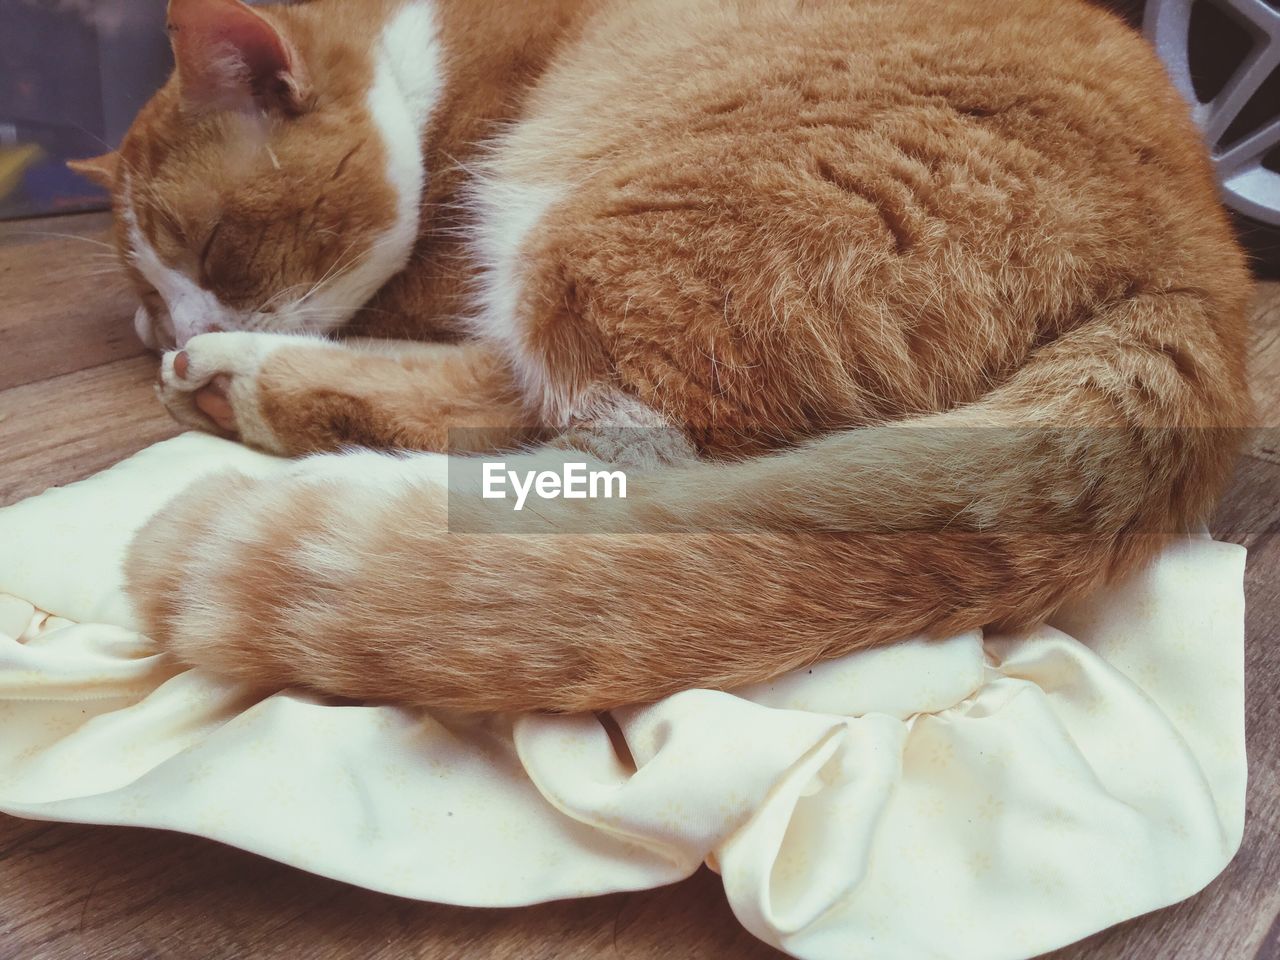 Close-up of ginger cat relaxing on fabric